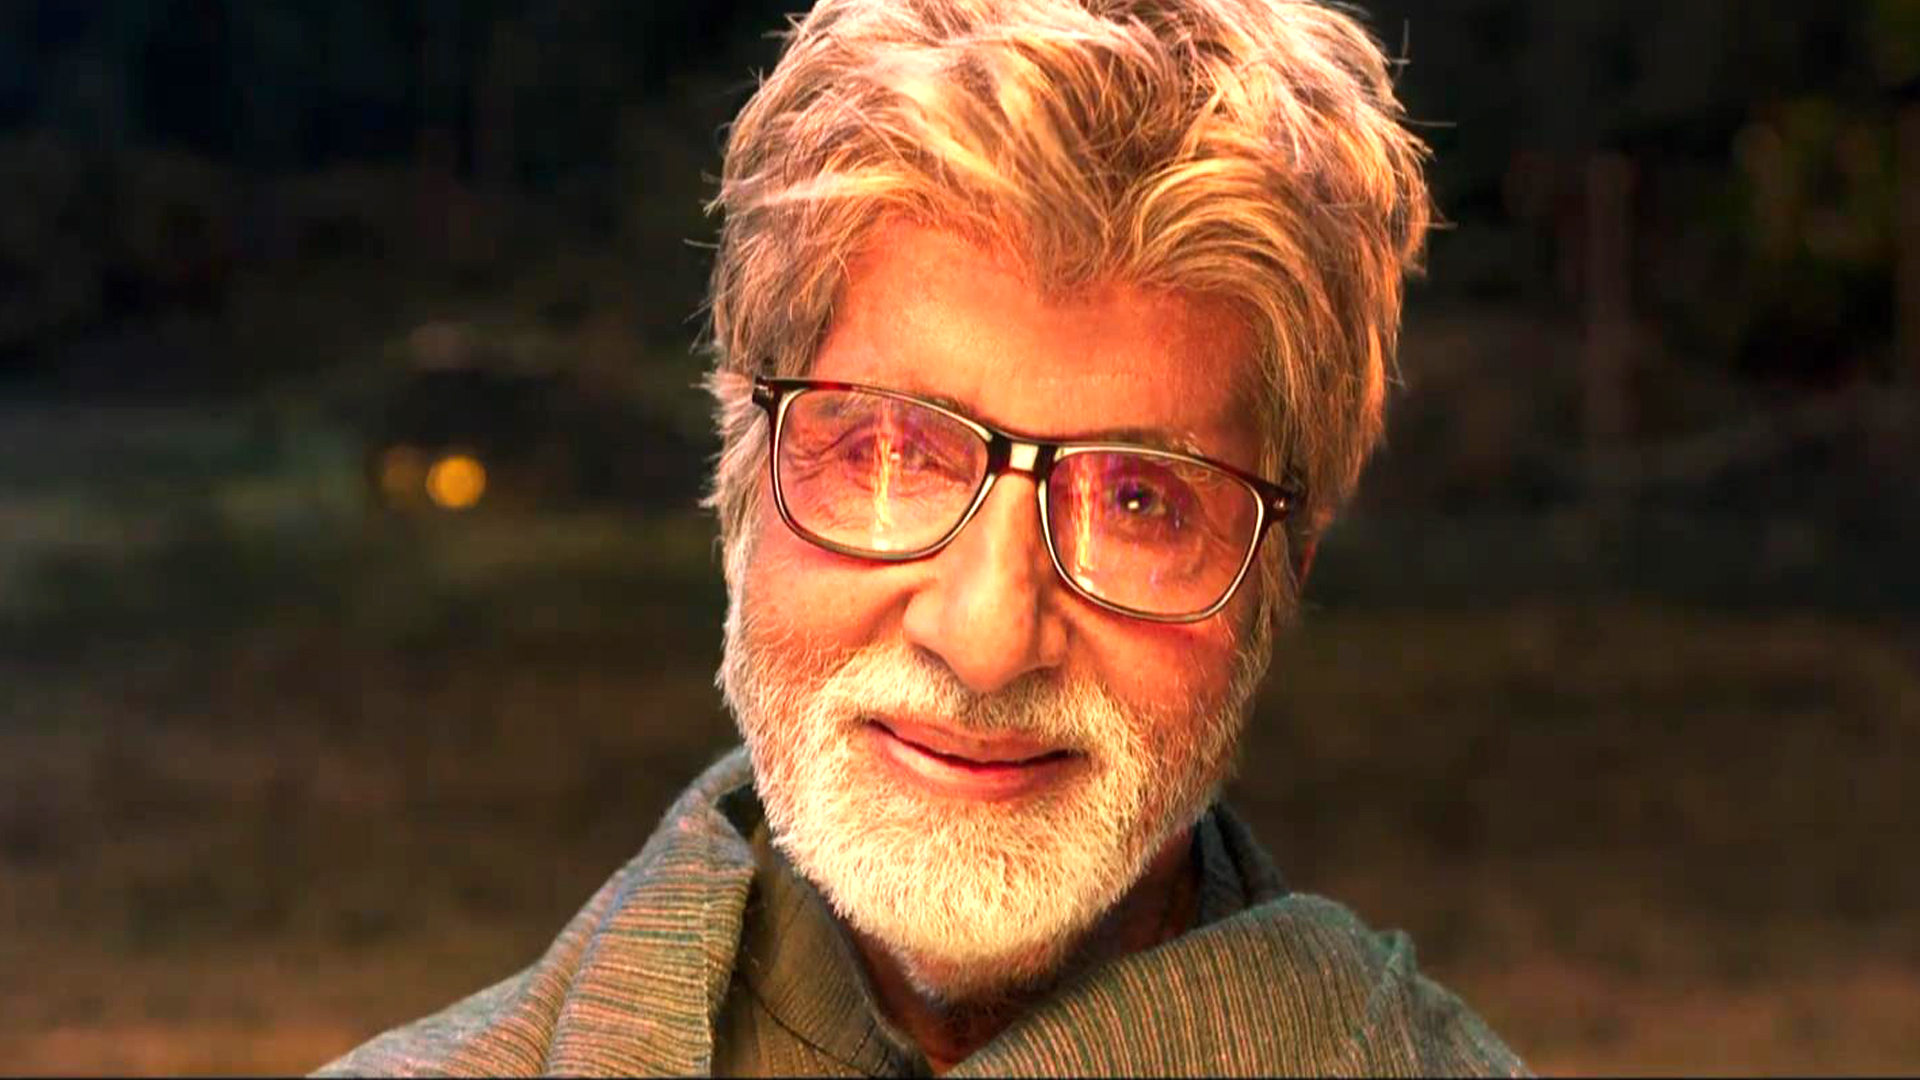 In the middle of Boycott Brahmastra and Alia Bhatt's controversial remarks, Amitabh Bachchan's tweet gets attention